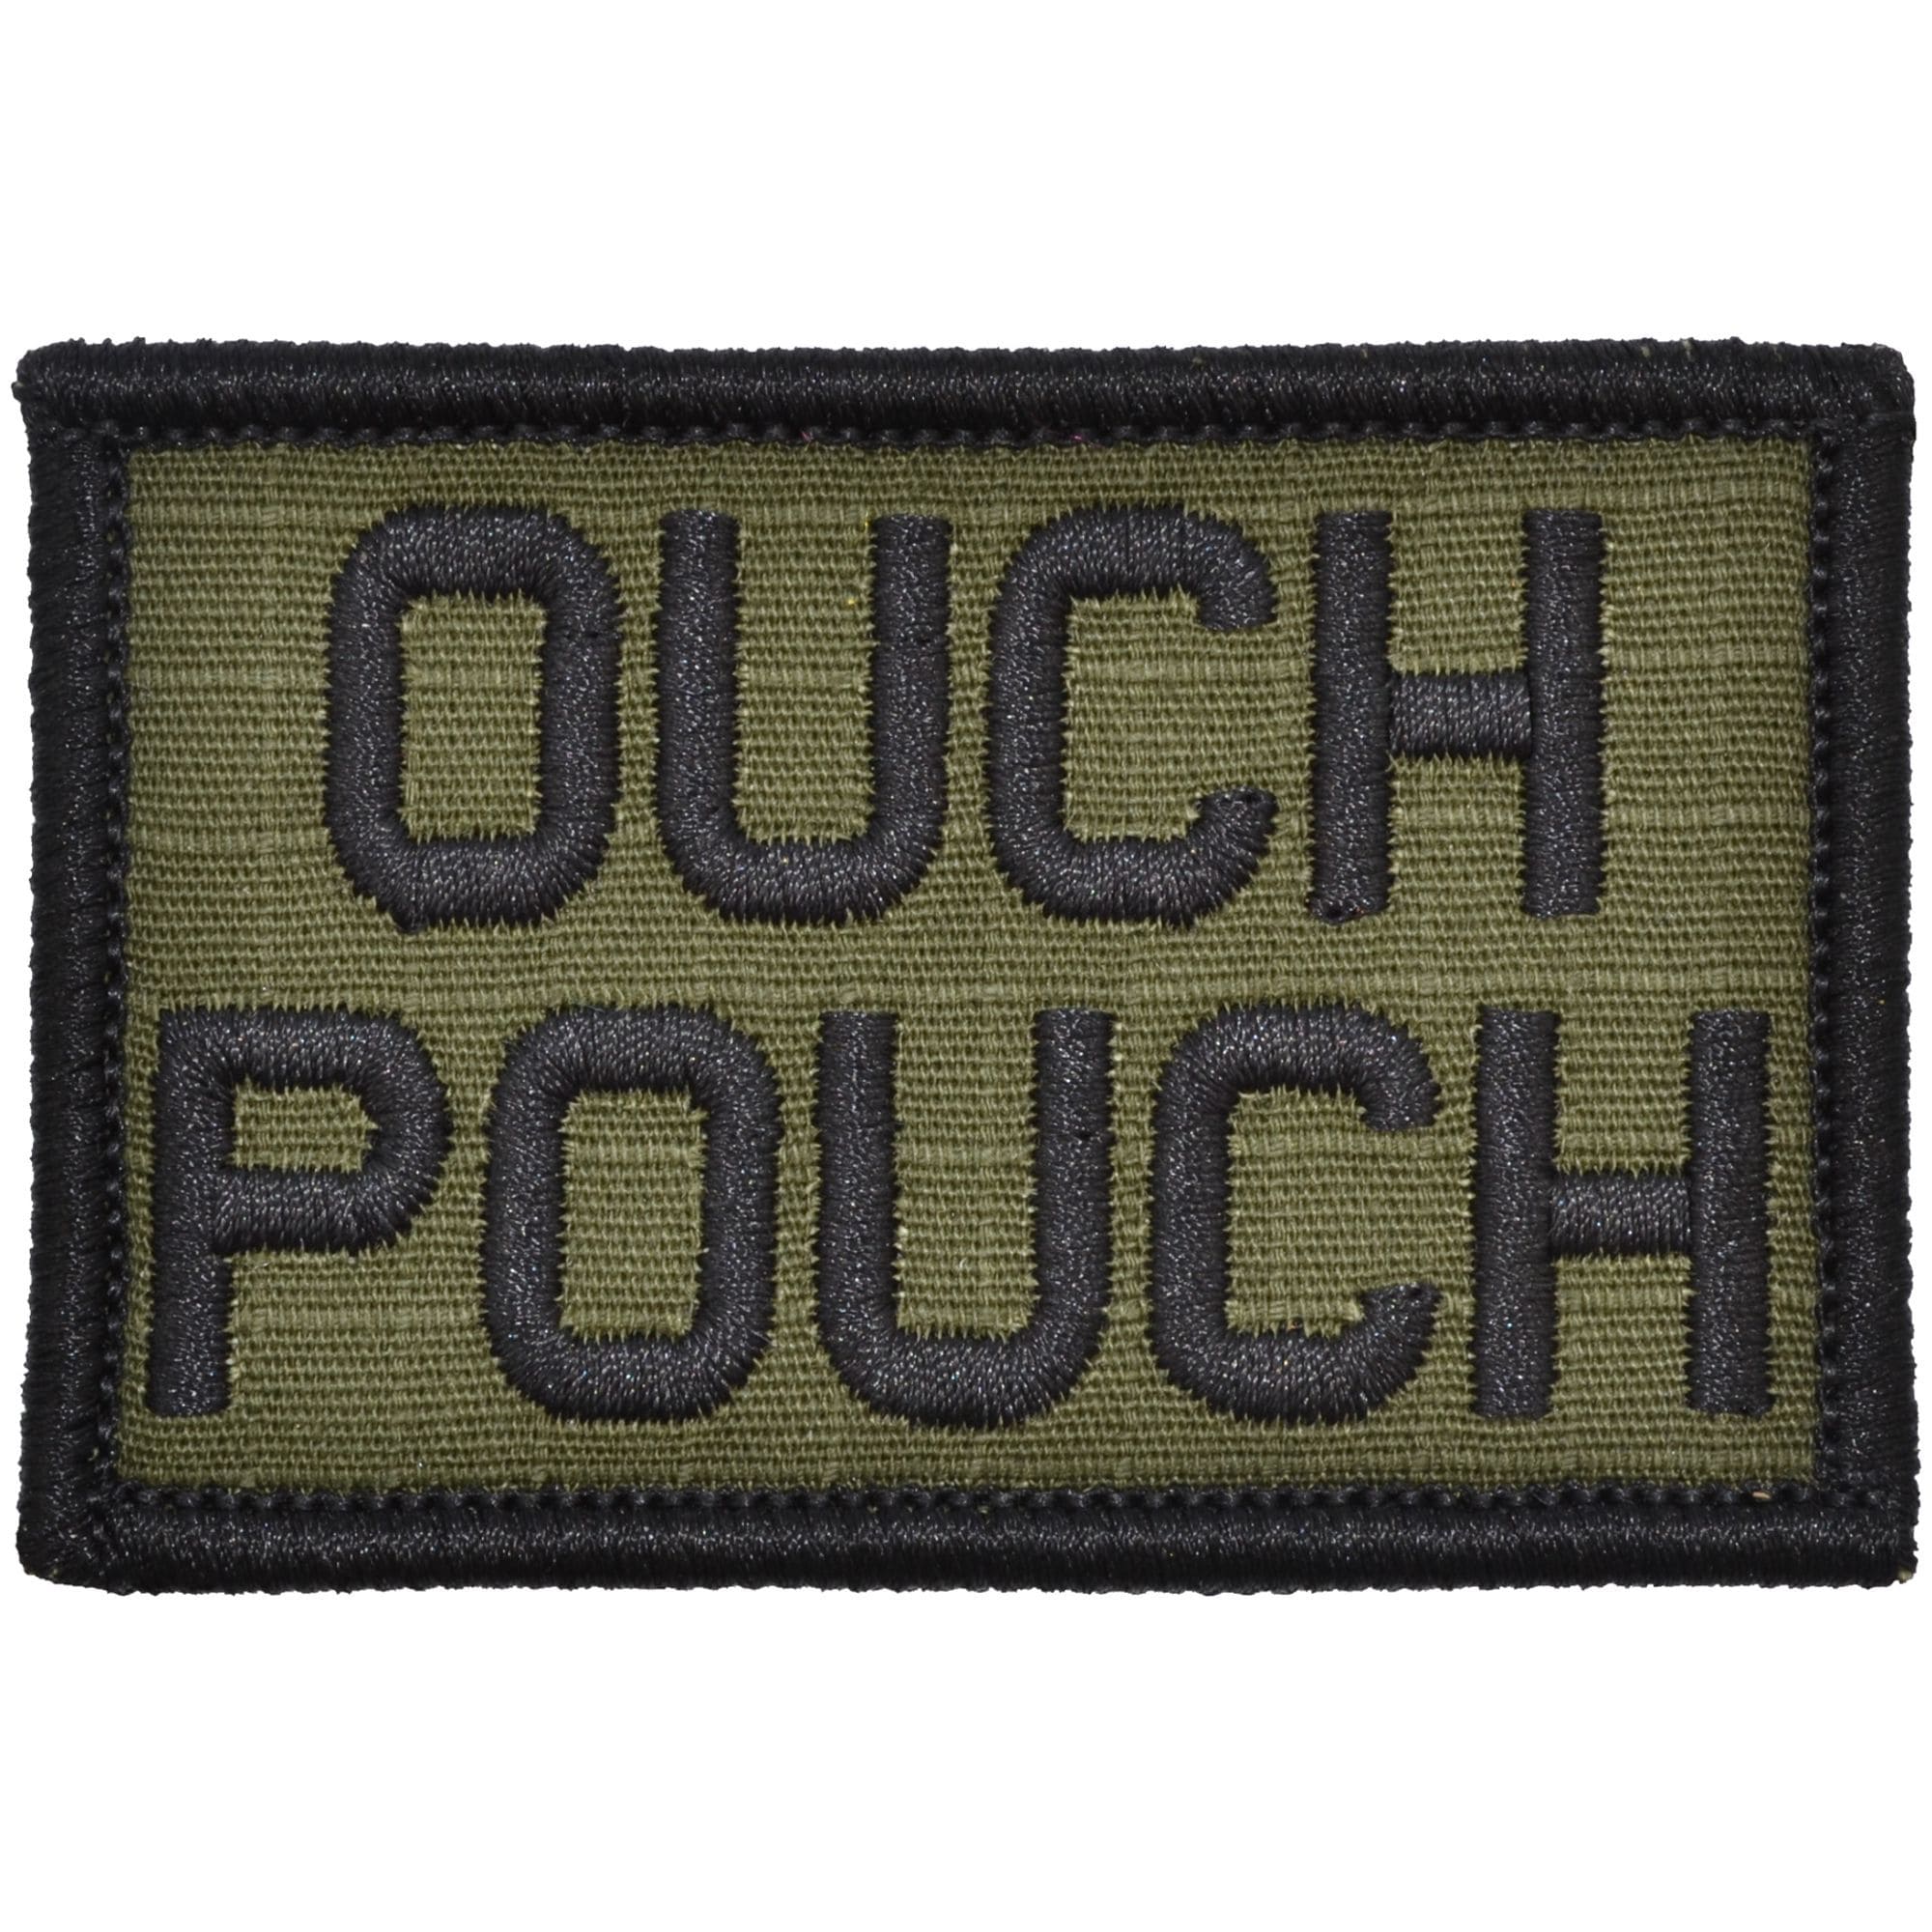 3 Pcs AliPlus Ouch Pouch Patch Embroidered Patch Tactical Military Morale Patch Applique Fastener Hook and Loop(3 Pcs)